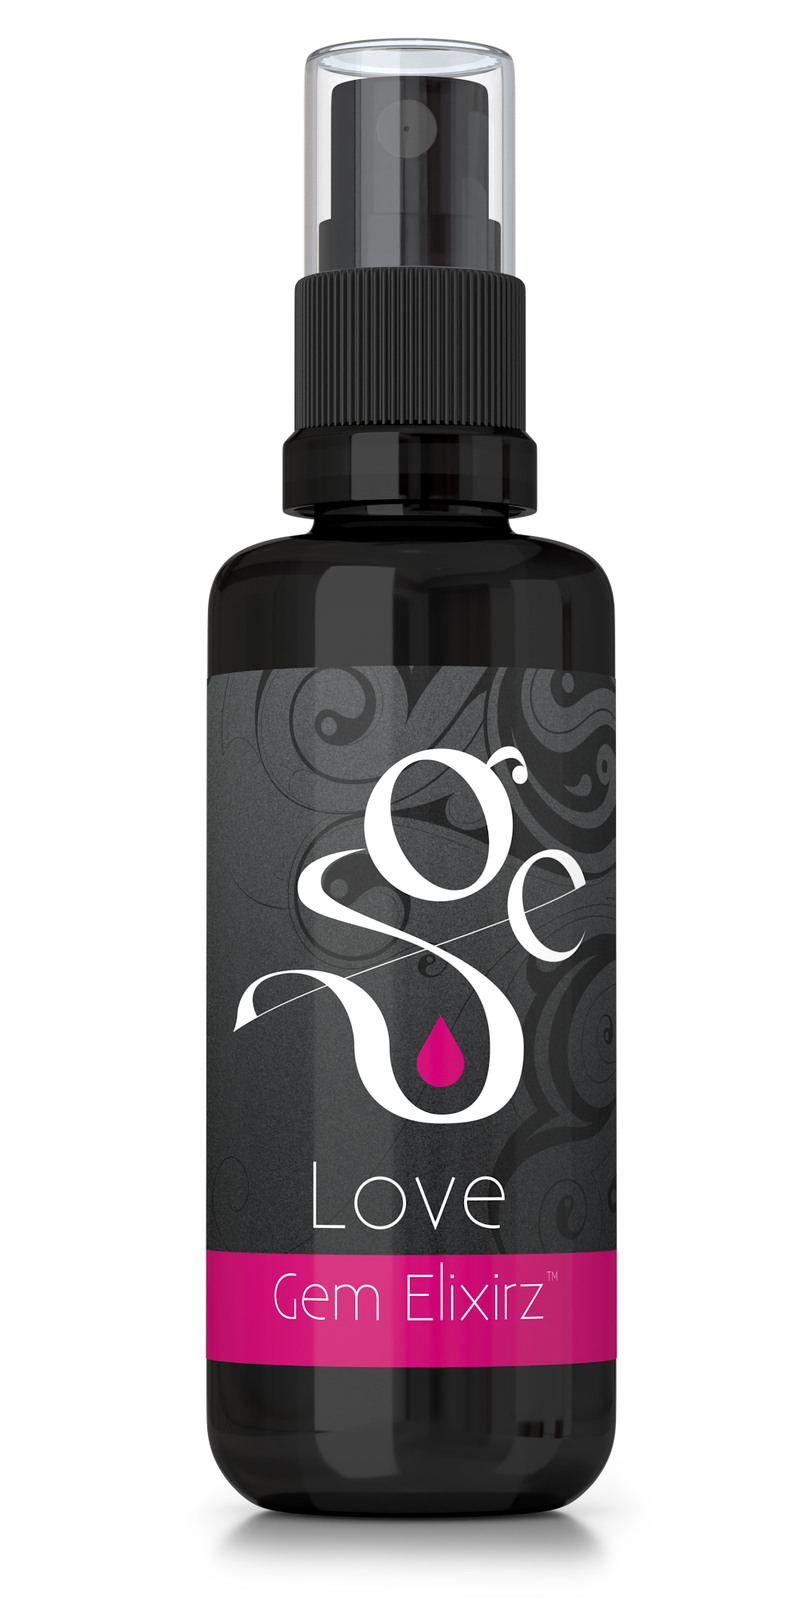 Love aromatherapy spray with essential oils and gemstones, frontside of bottle